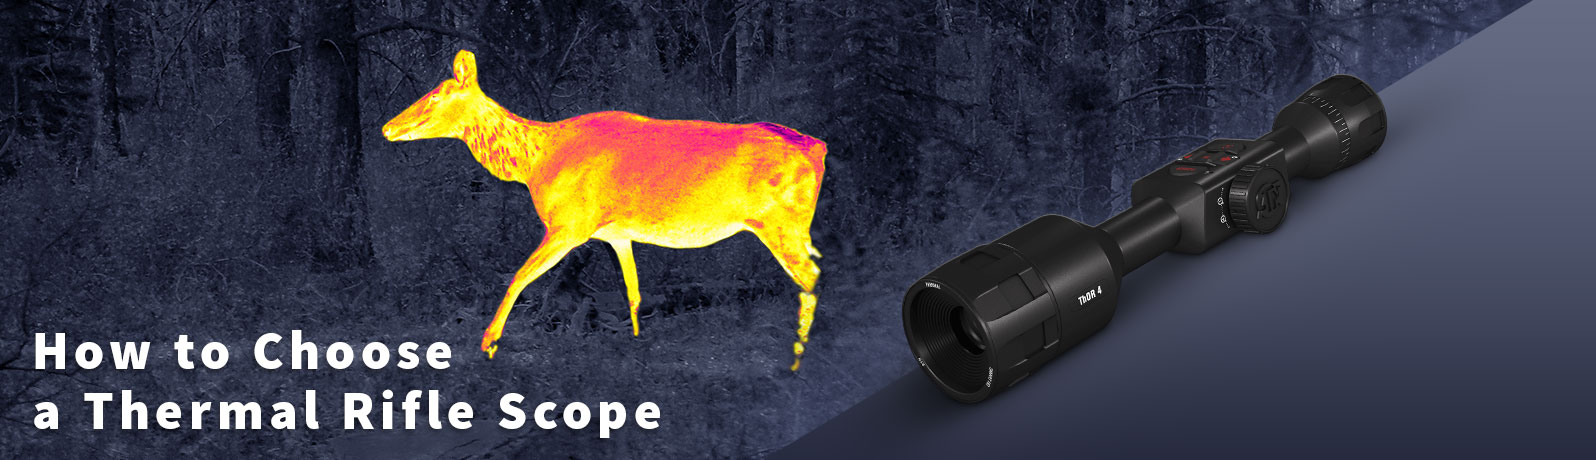 How to Choose a Thermal Rifle Scope